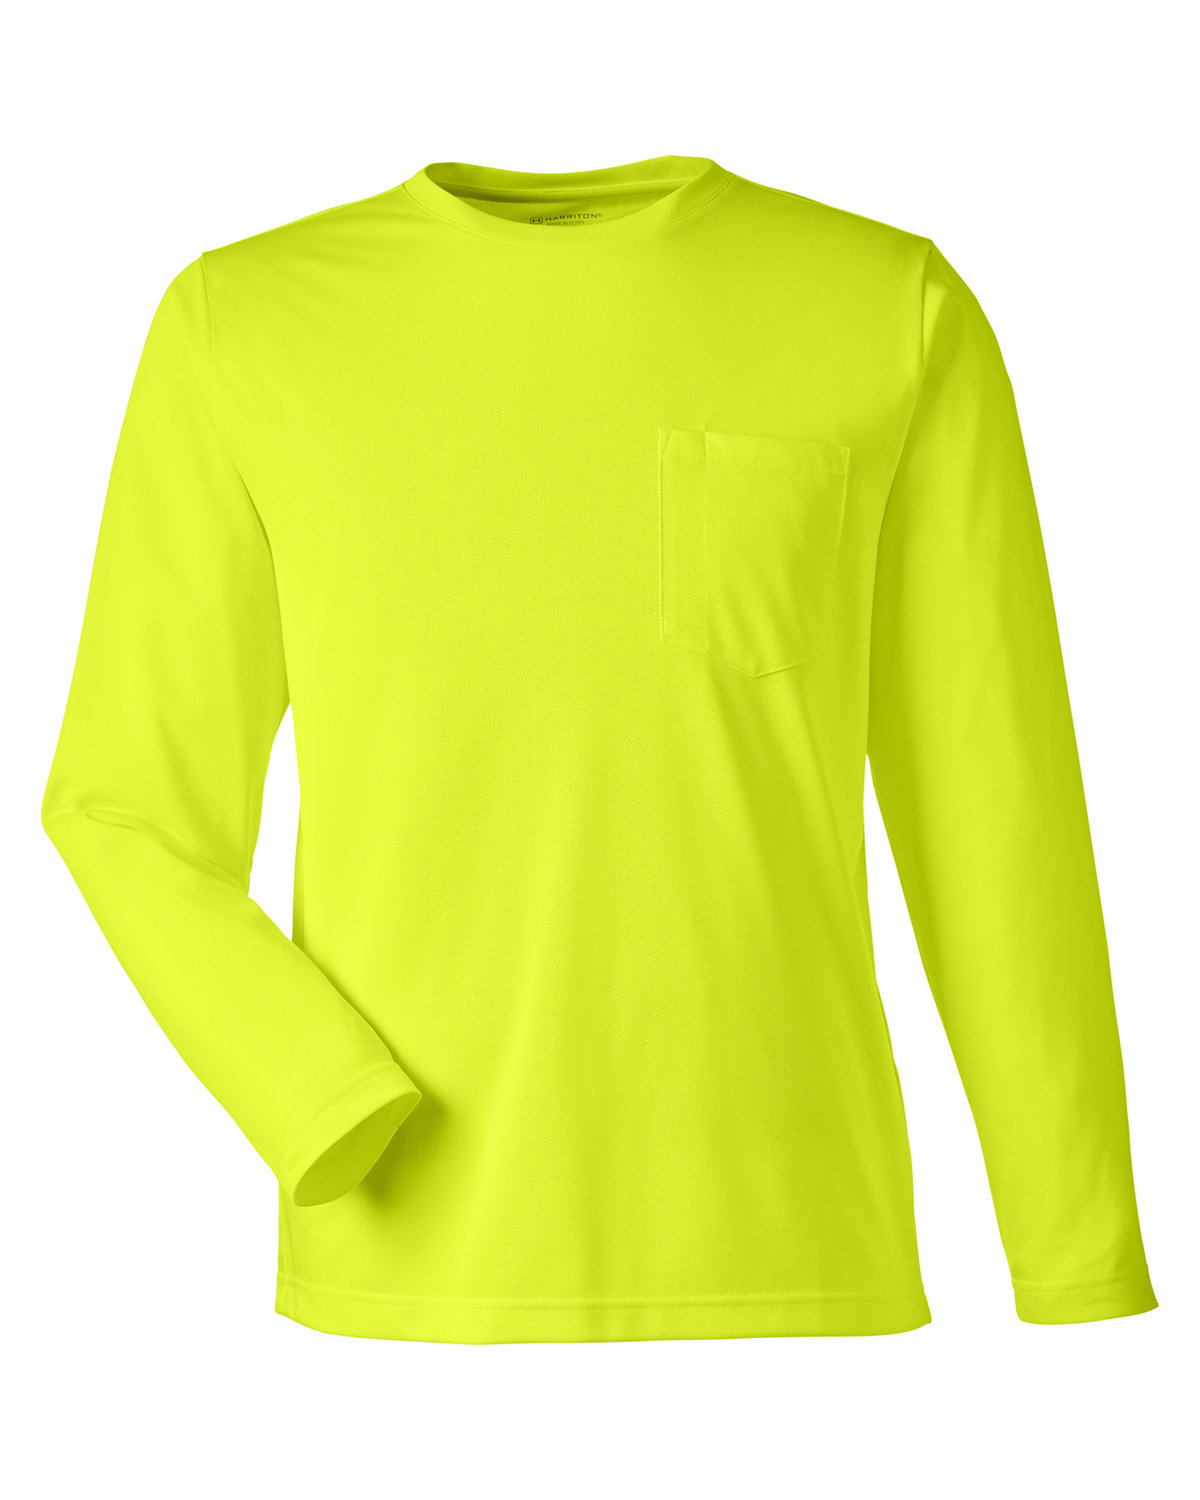 Harriton M118L - Unisex Charge Snag and Soil Protect Long-Sleeve T-Shirt